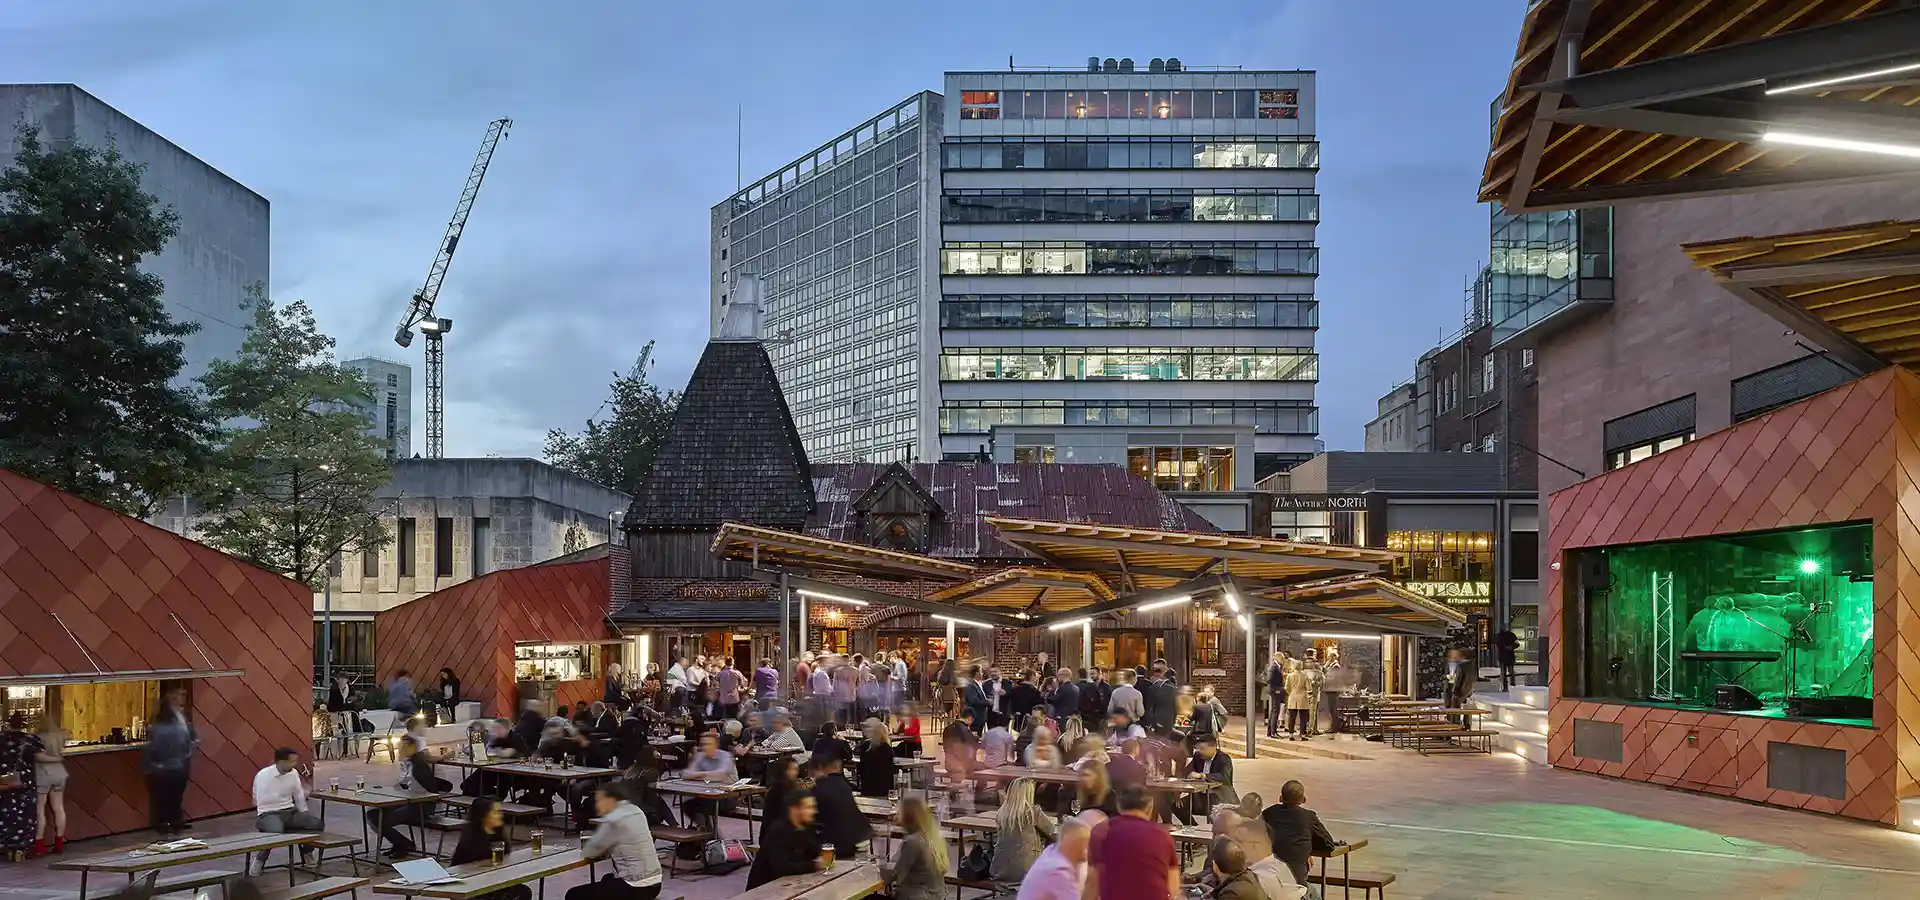 the oast house pub and beer garden in crown square